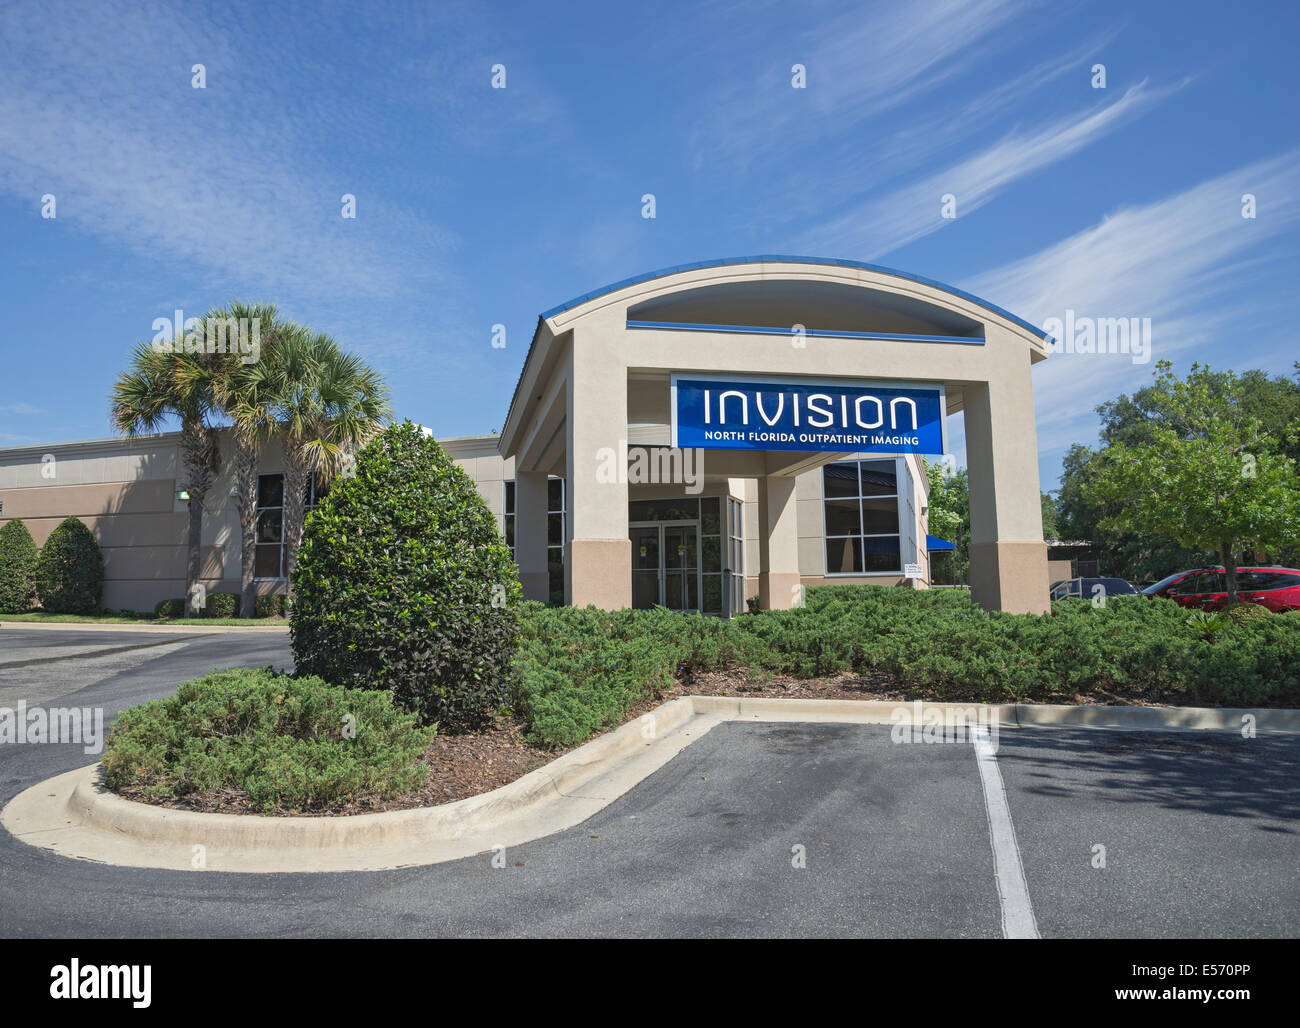 Invision Imaging is North Florida Regional Hospital's outpatient radiology and diagnostic imaging center located in Gainesville  Stock Photo